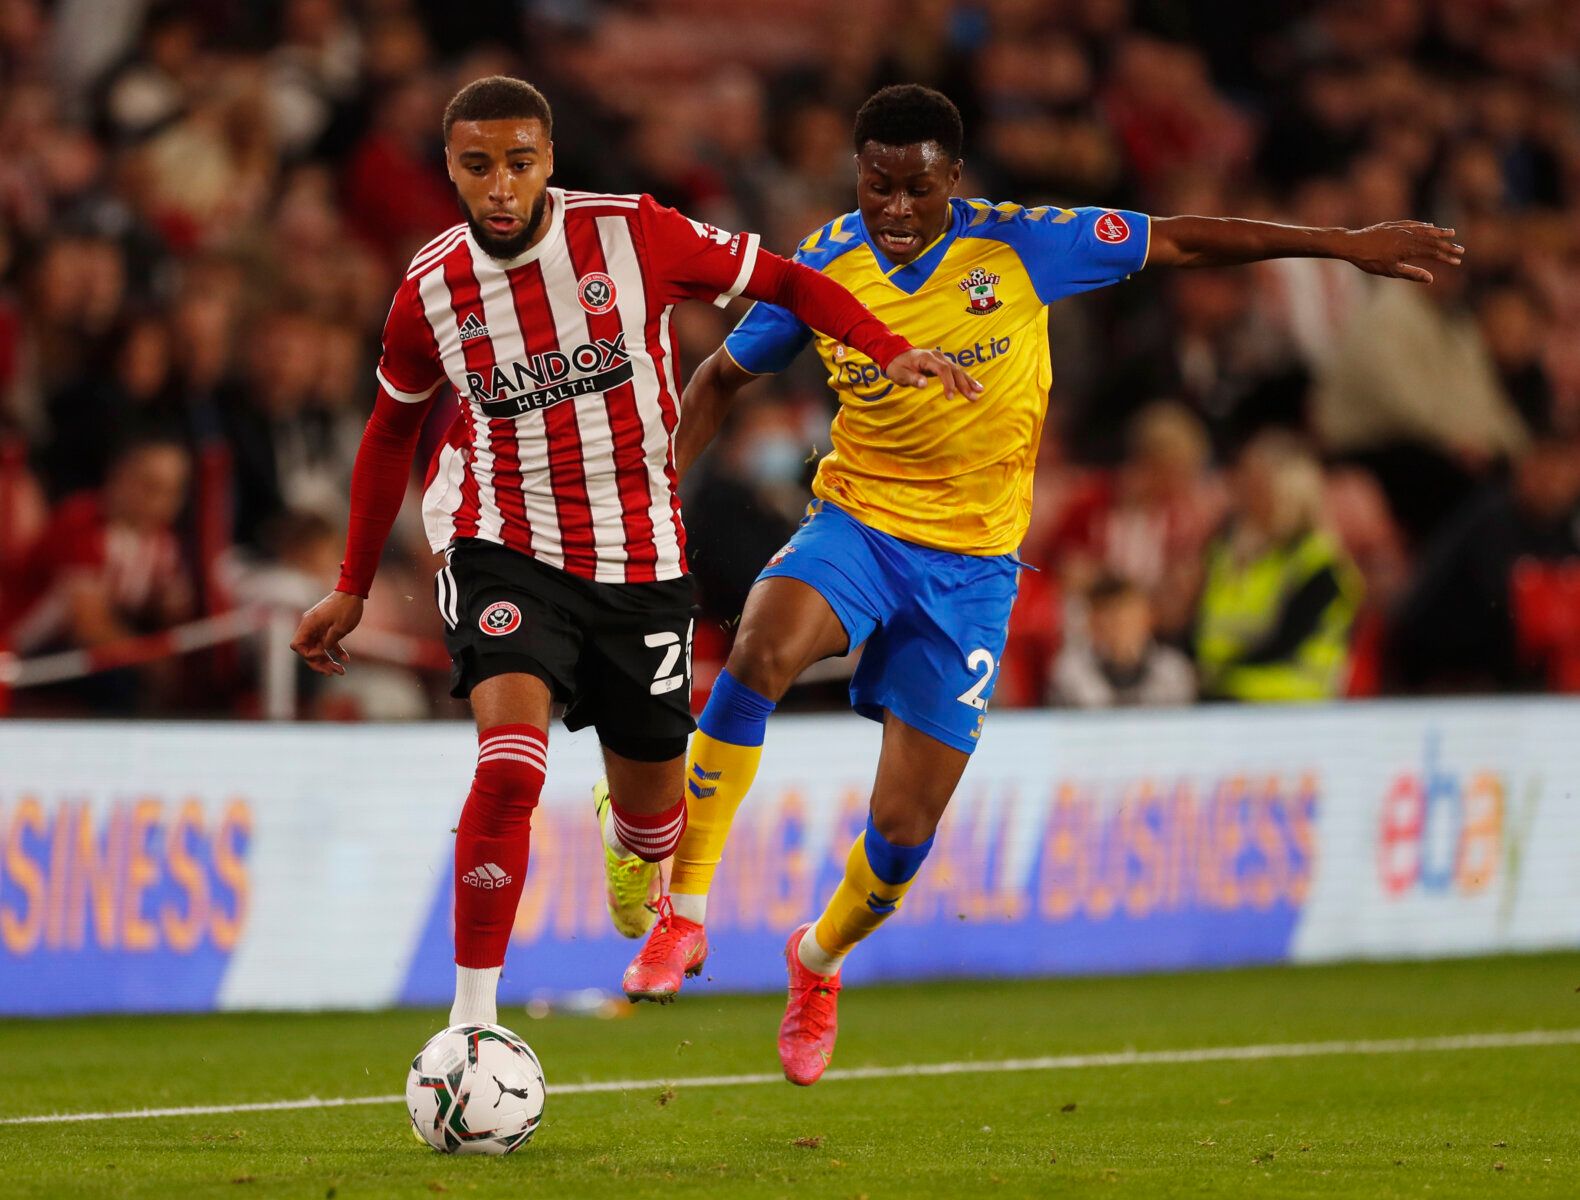 Soccer Football - Carabao Cup - Third Round - Sheffield United v Southampton - Bramall Lane, Sheffield, Britain - September 21, 2021 Sheffield United's Jayden Bogle in action with Southampton's Nathan Tella Action Images via Reuters/Lee Smith EDITORIAL USE ONLY. No use with unauthorized audio, video, data, fixture lists, club/league logos or 'live' services. Online in-match use limited to 75 images, no video emulation. No use in betting, games or single club /league/player publications.  Please 